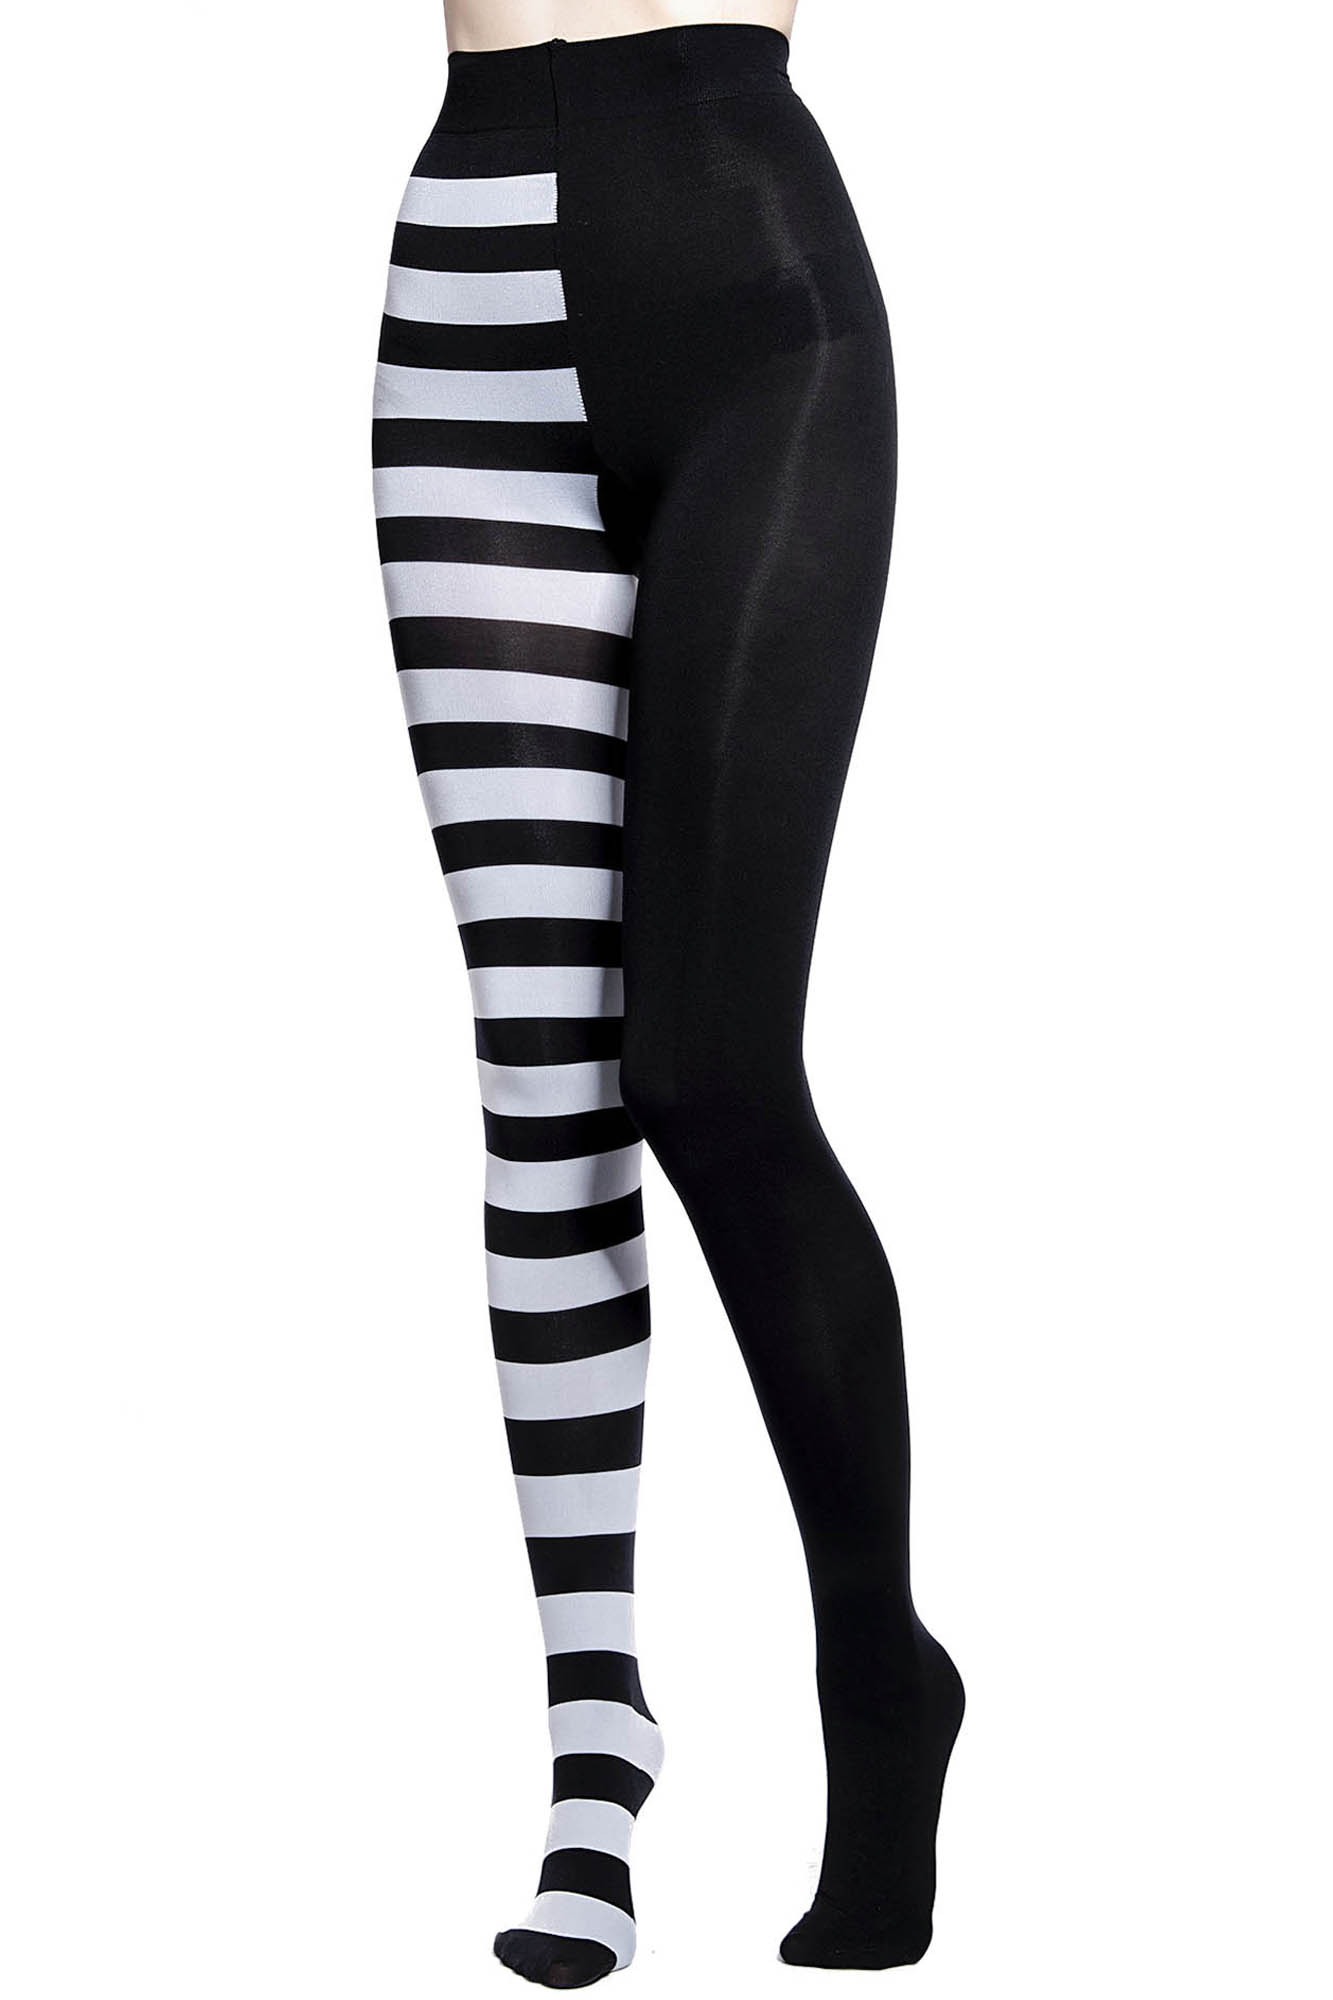 Black and White Striped Women's Tights